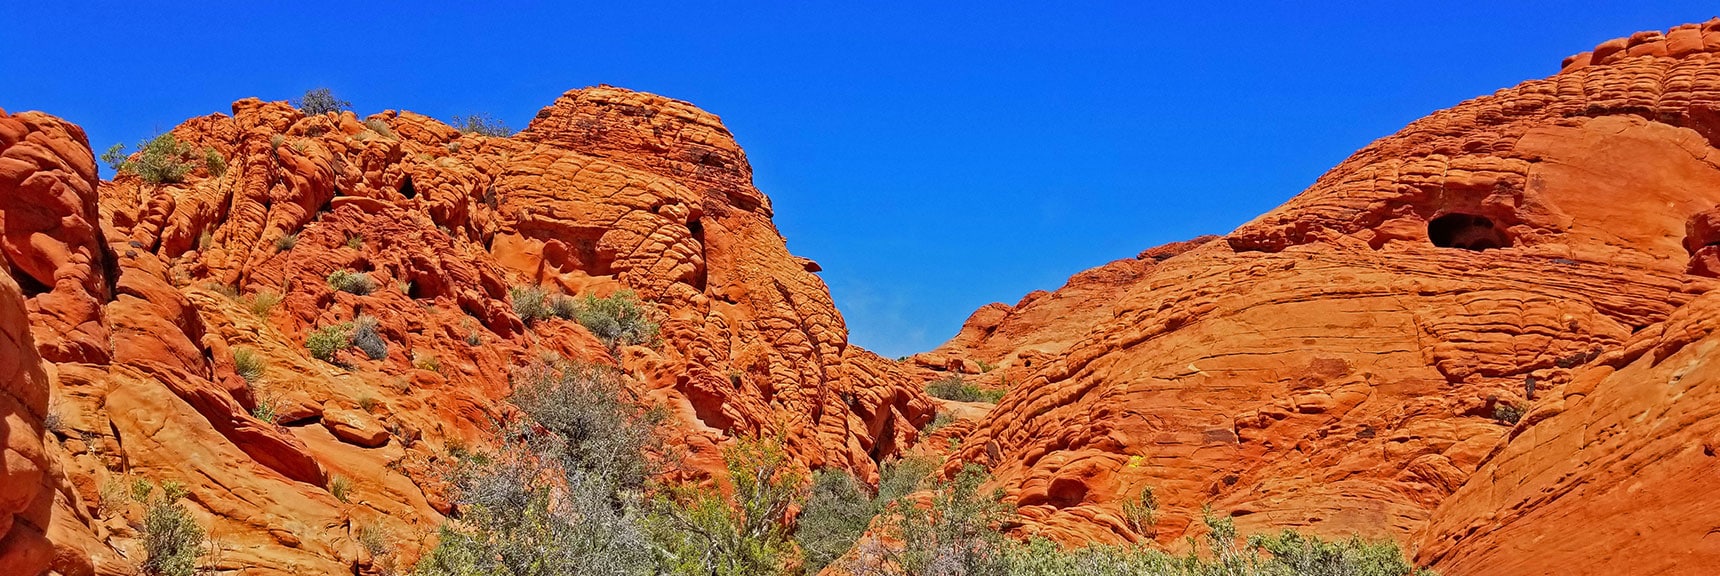 Note the Layered Beehive Formations, Similar to Those at Valley of Fire State Park | Little Red Rock Las Vegas, Nevada, Near La Madre Mountains Wilderness